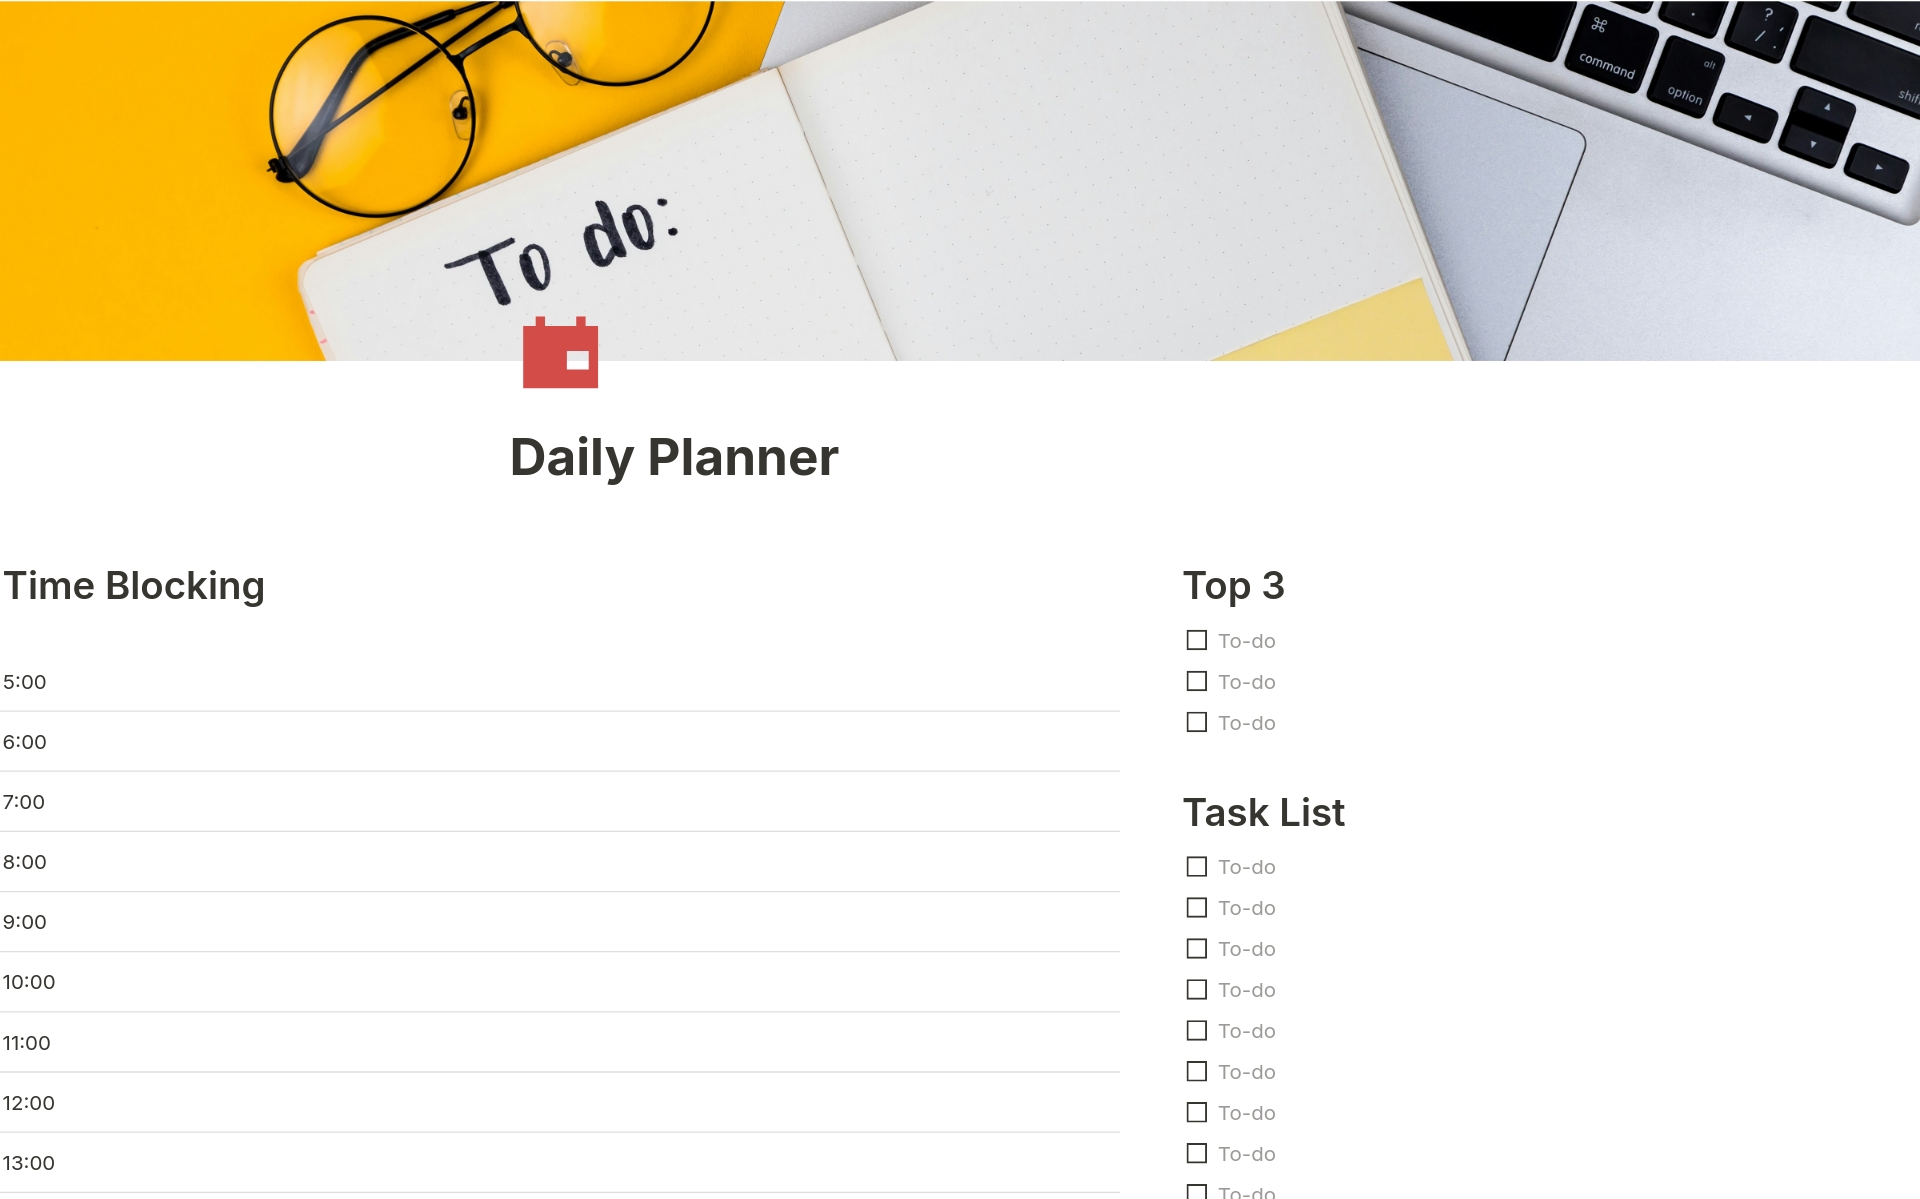 Unleash your productivity potential with our Comprehensive Daily Planner, featuring time blocking, top 3 prioritization, a full task list, notes, and reflection sections for a day that's organized, efficient, and growth-oriented.